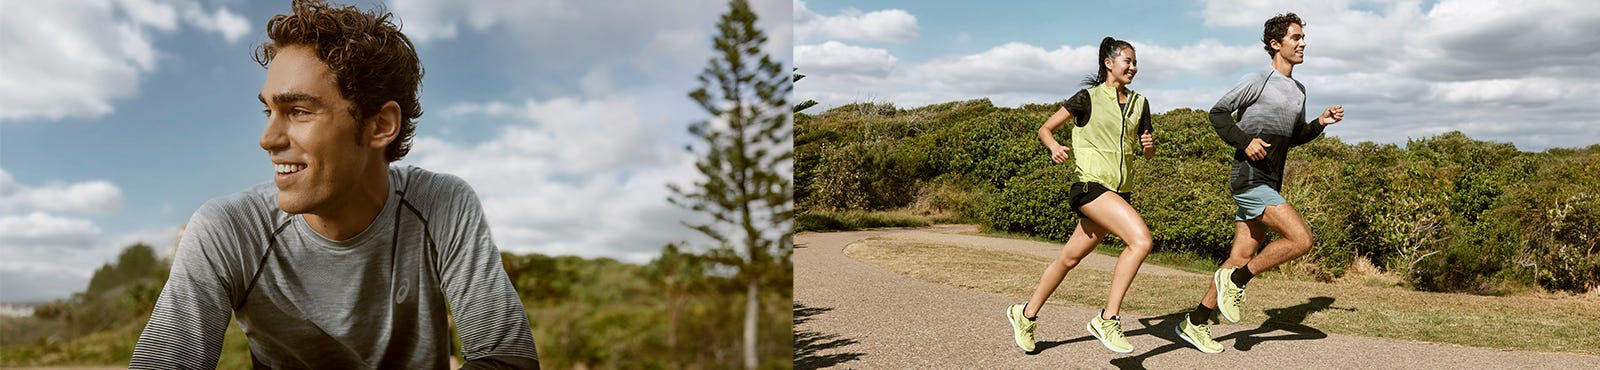 Split image of one runner resting and two runners running on a trail